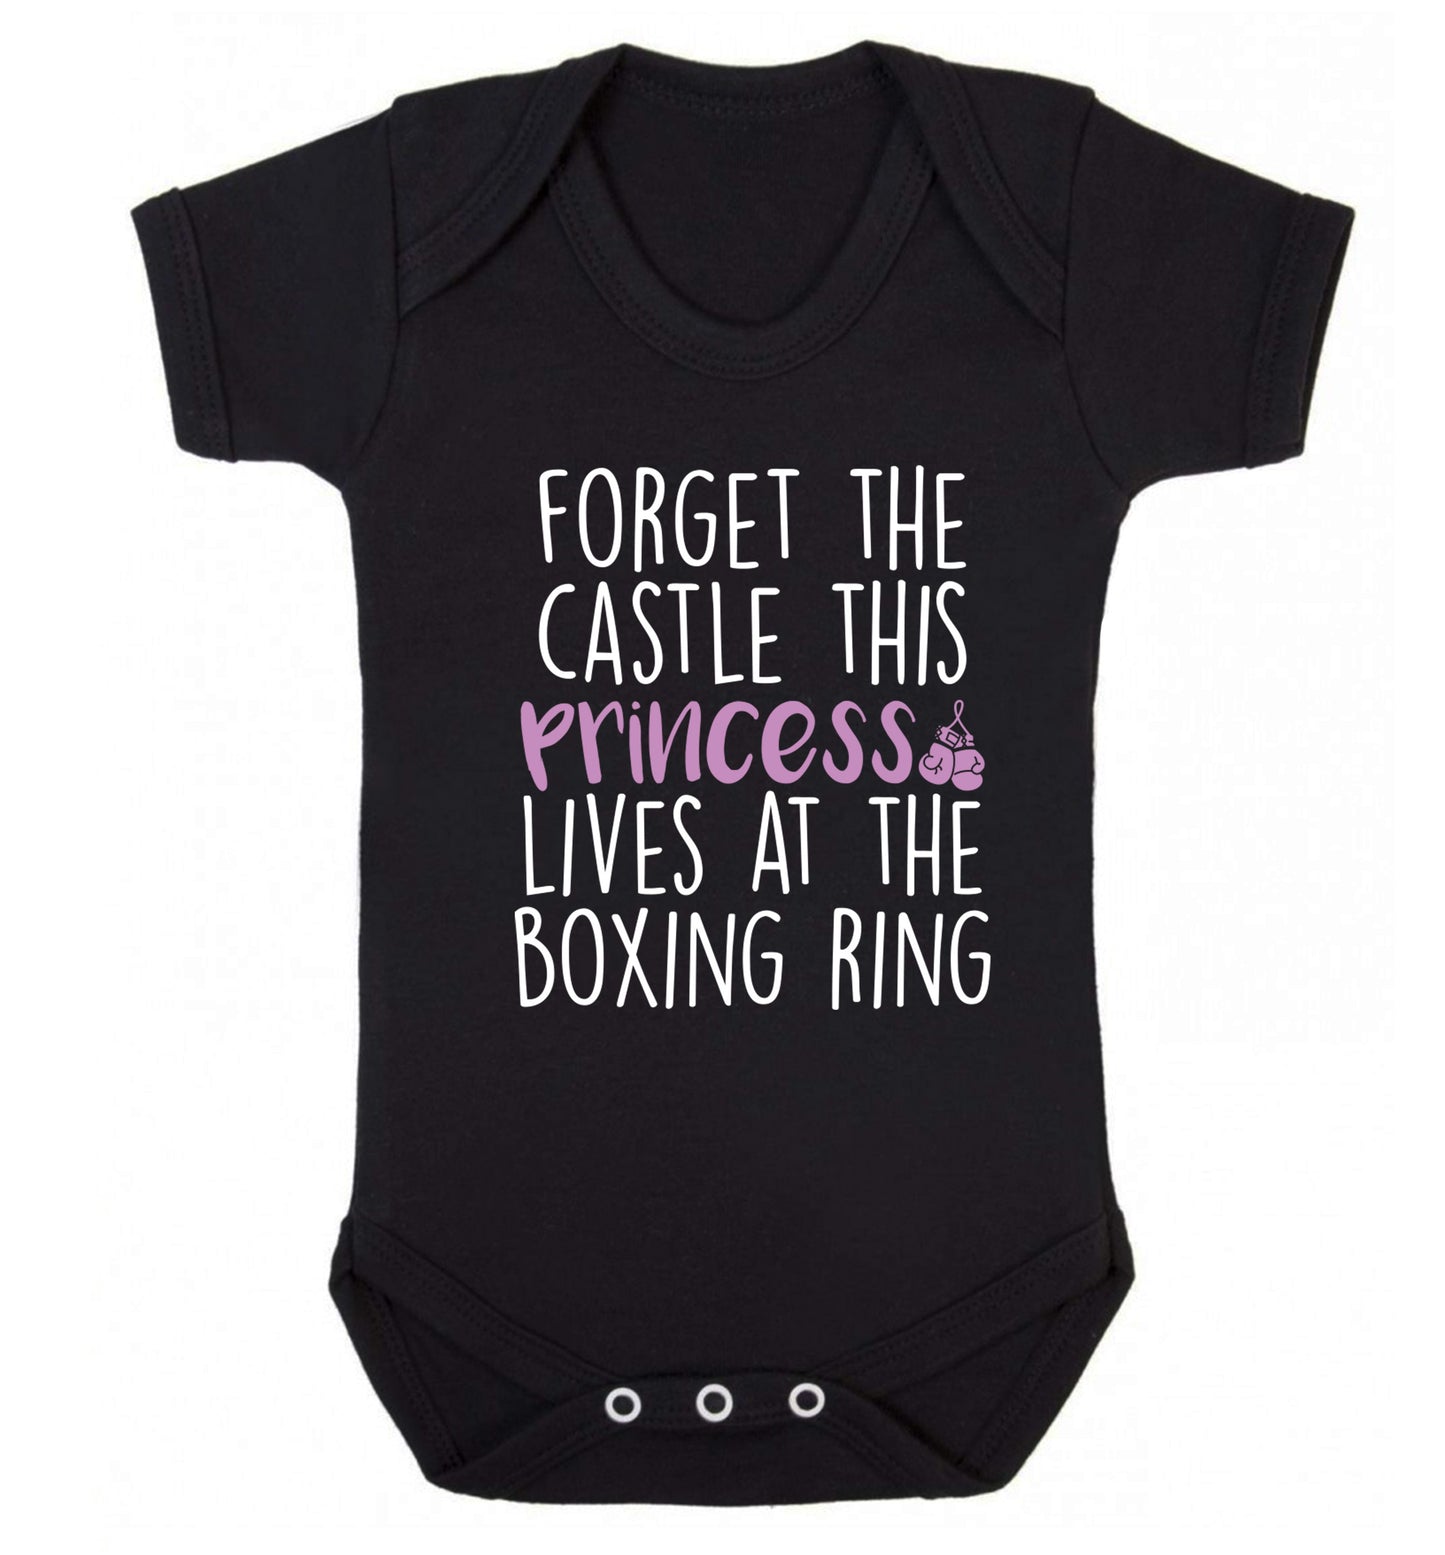 Forget the castle this princess lives at the boxing ring Baby Vest black 18-24 months